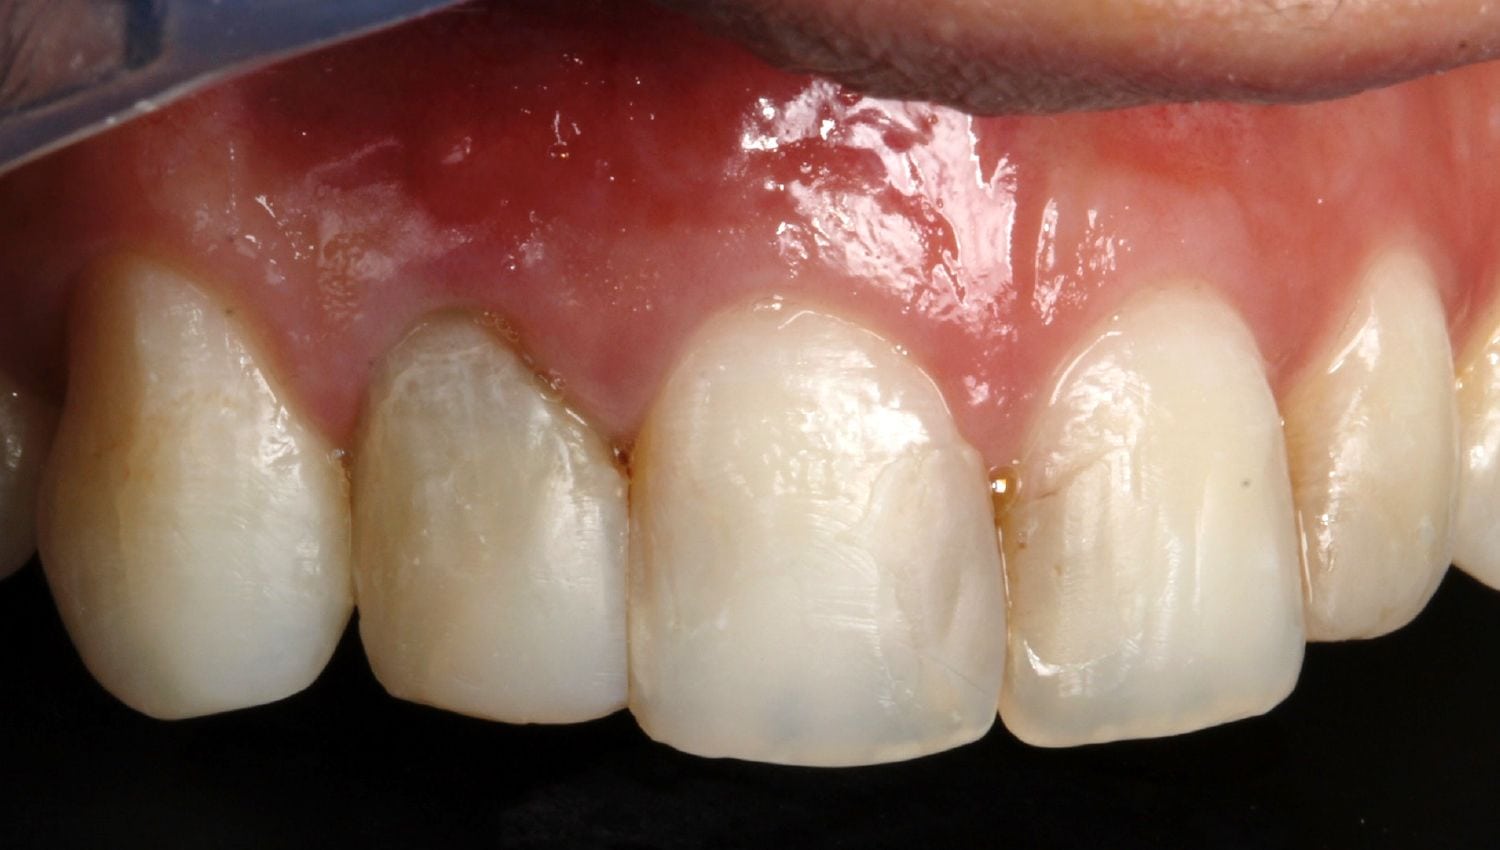 Dental Implants before and after photos - broken front tooth